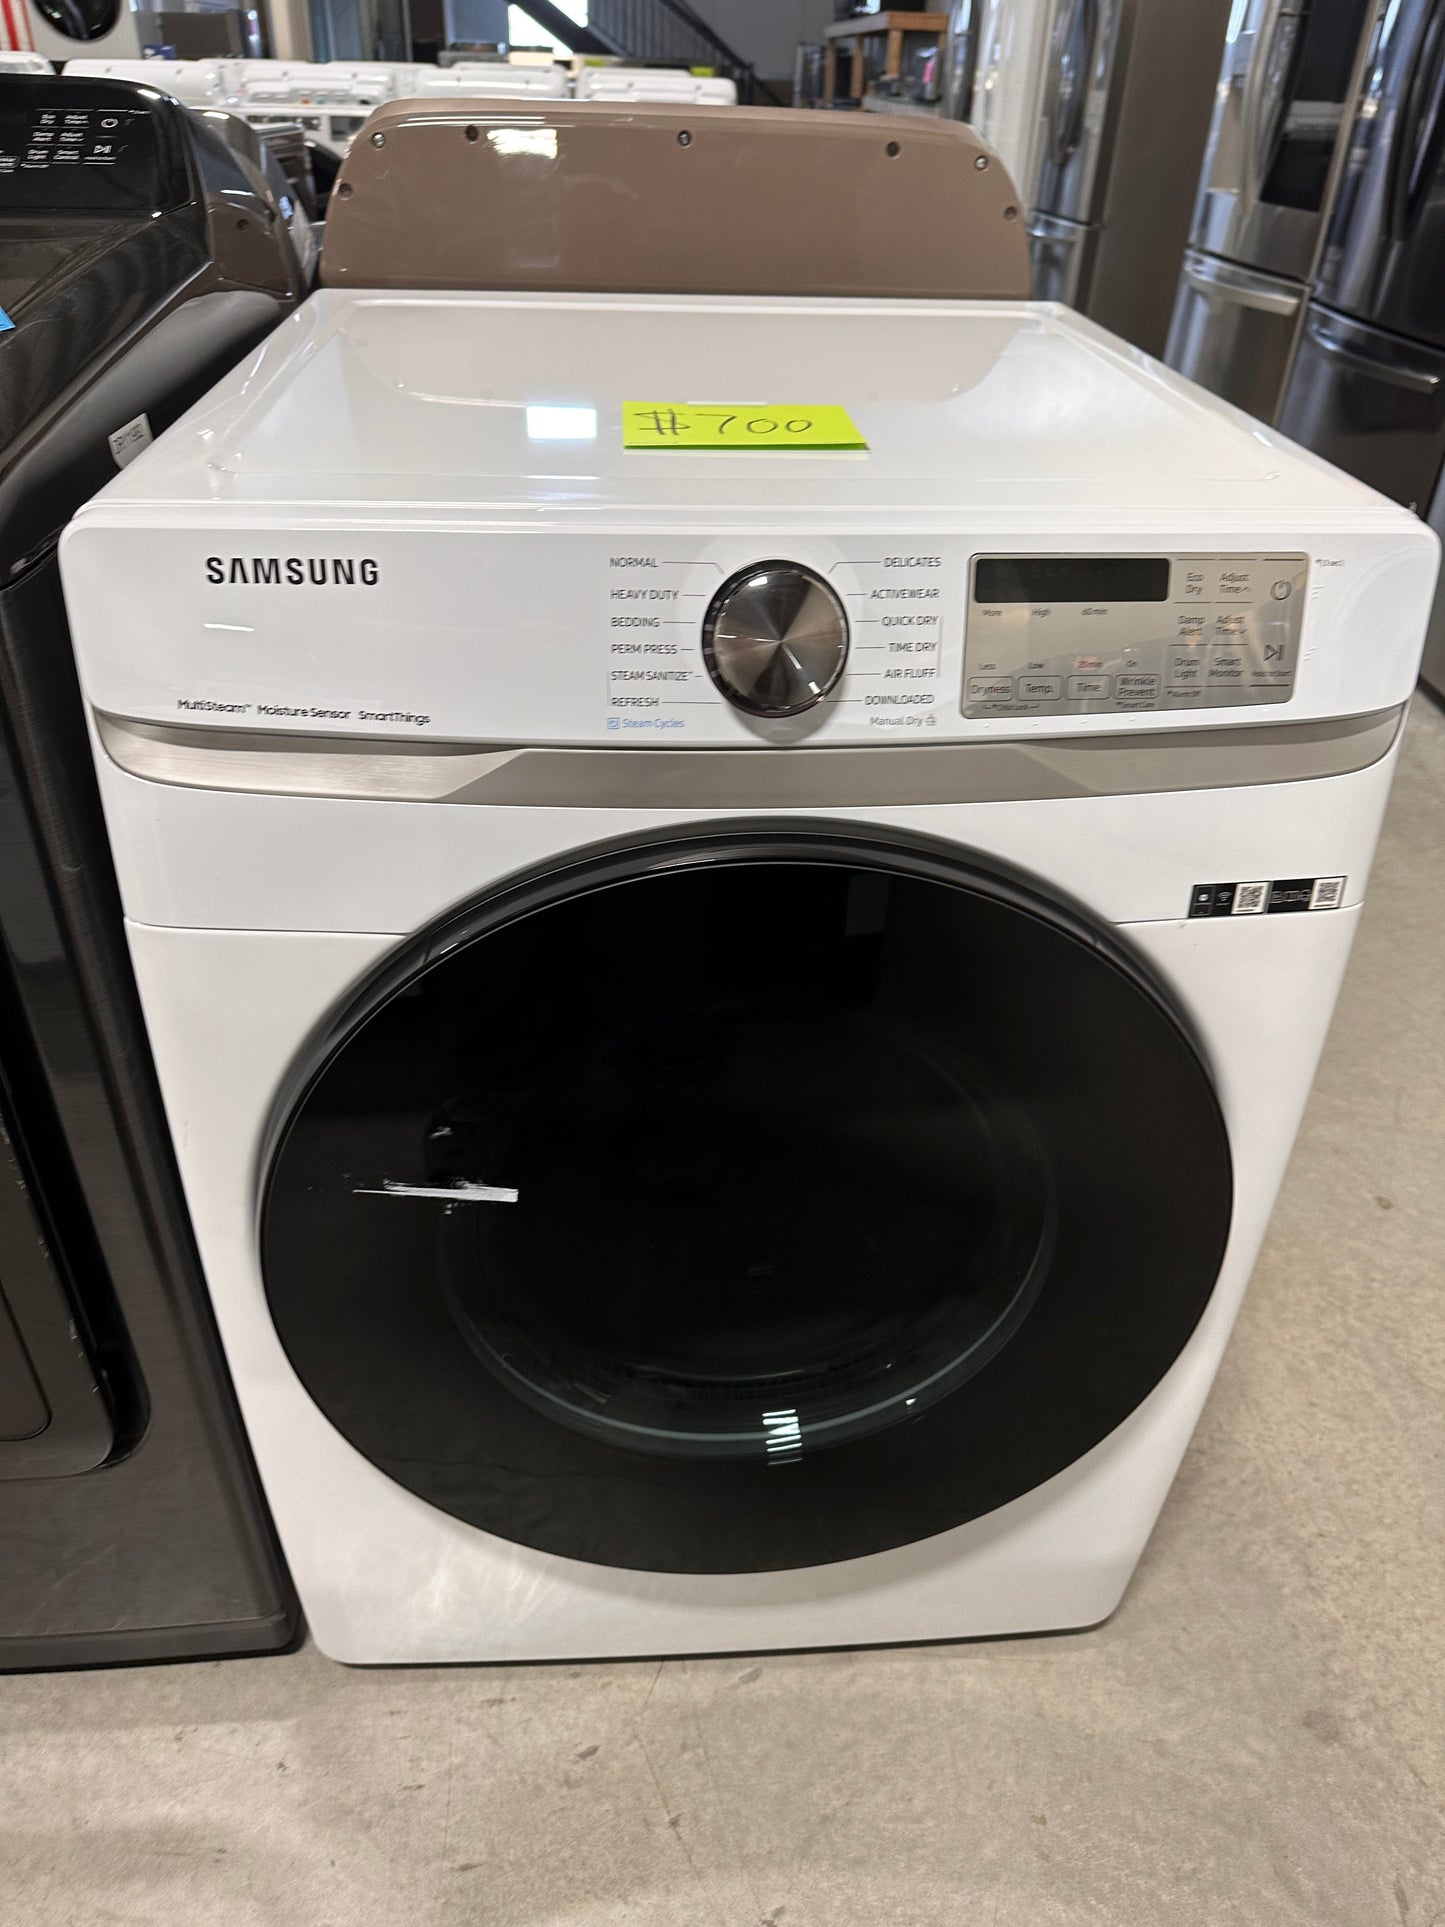 SAMSUNG GAS DRYER WITH STEAM - NEW STACKABLE DRYER - DRY12208 DVG45B6300W